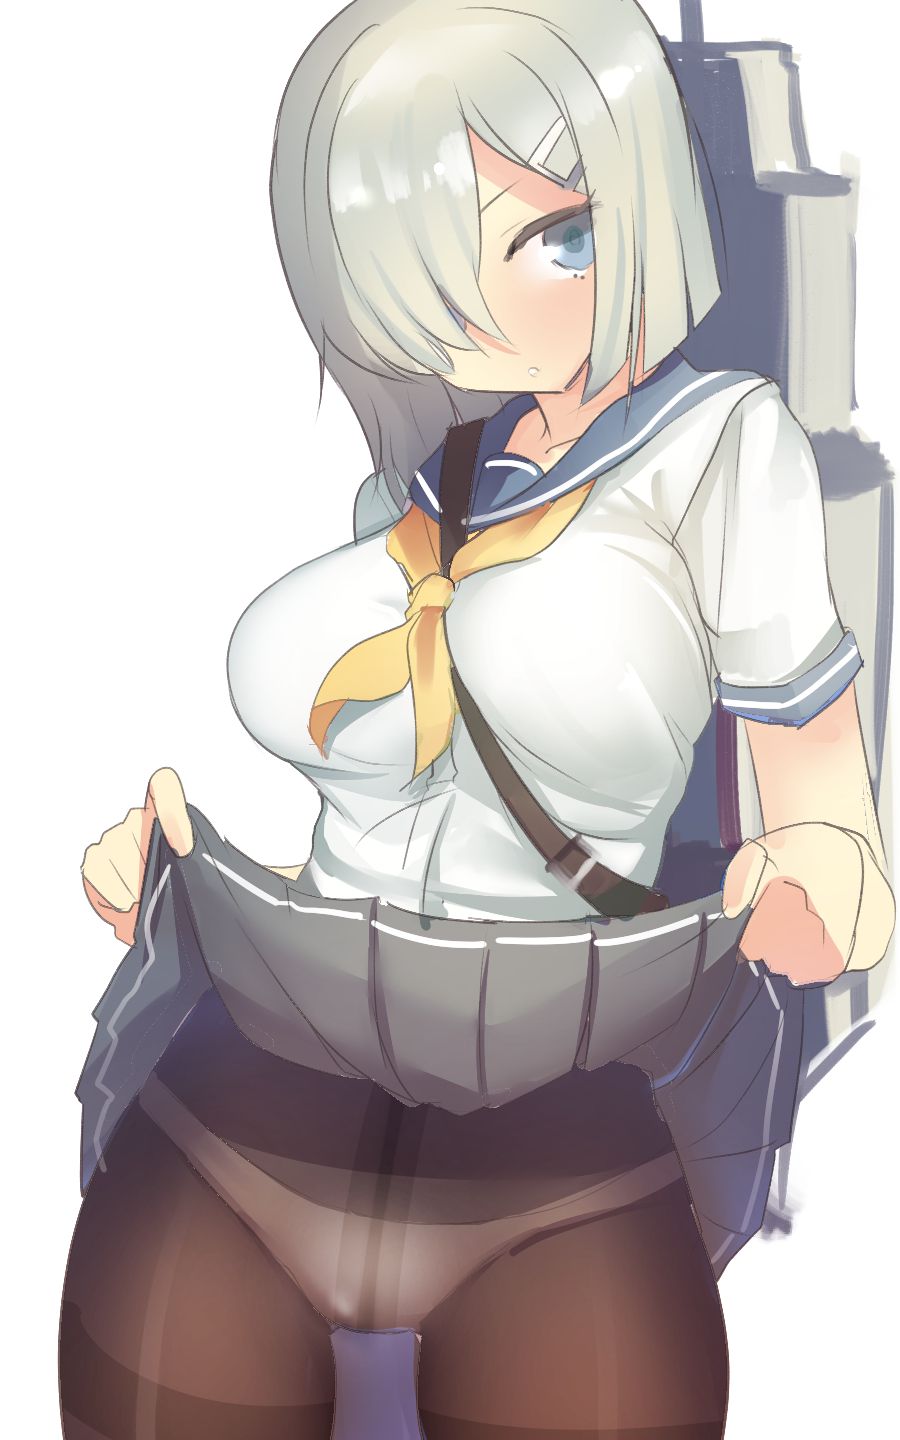 [Image] "ship this ' of warship daughter sexy cuteness is abnormal wwwwwwwwwwww 44